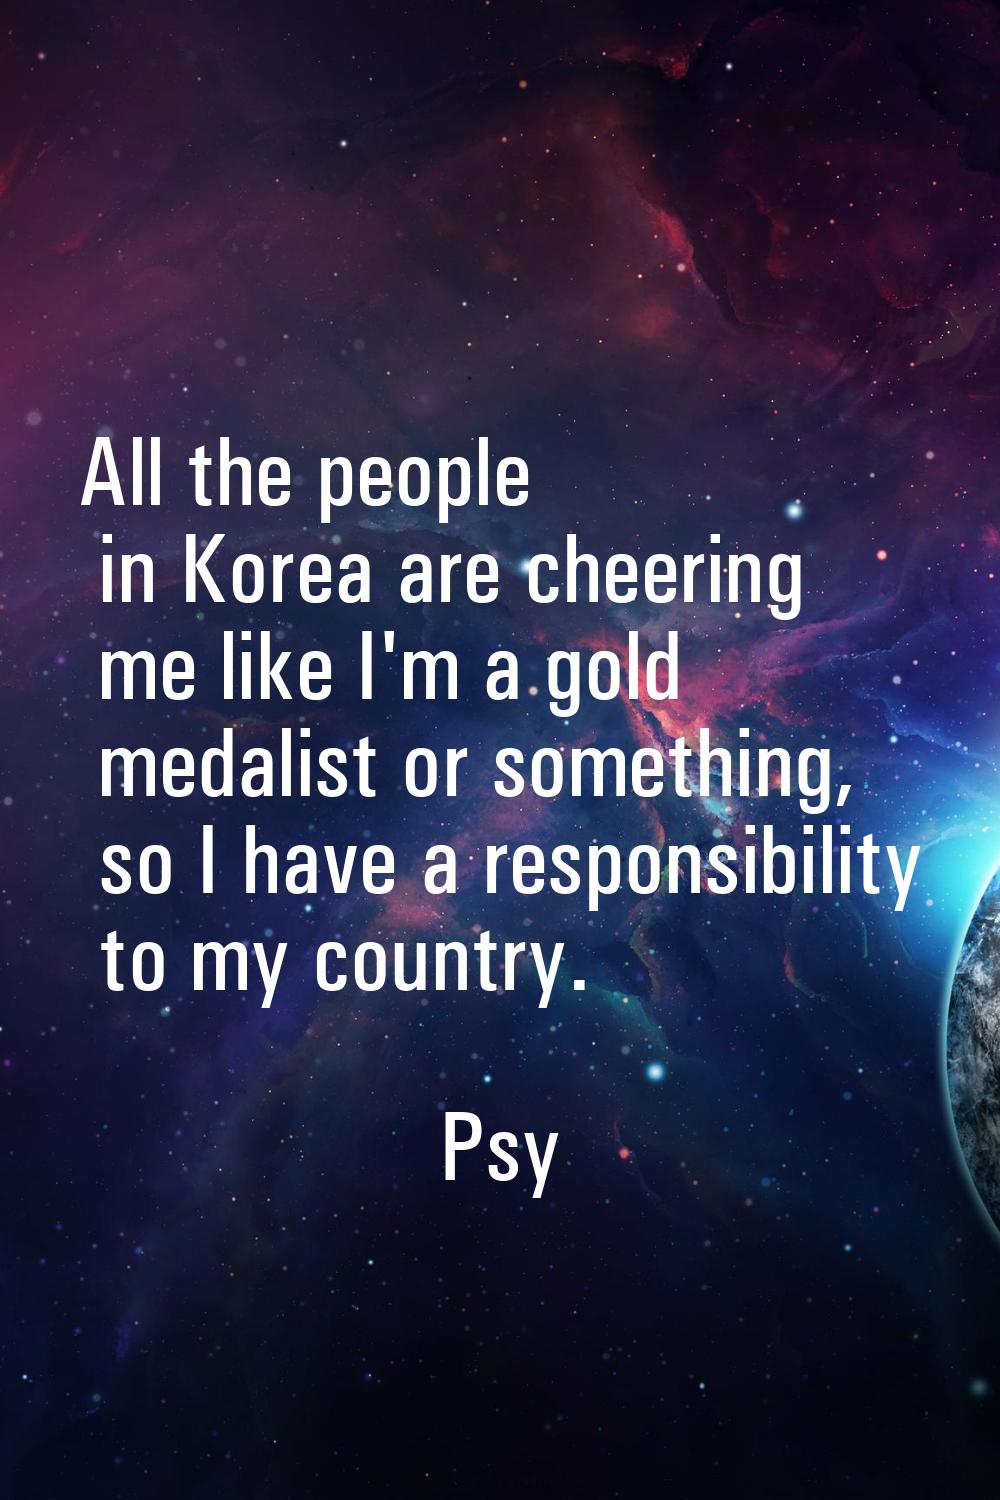 All the people in Korea are cheering me like I'm a gold medalist or something, so I have a responsi